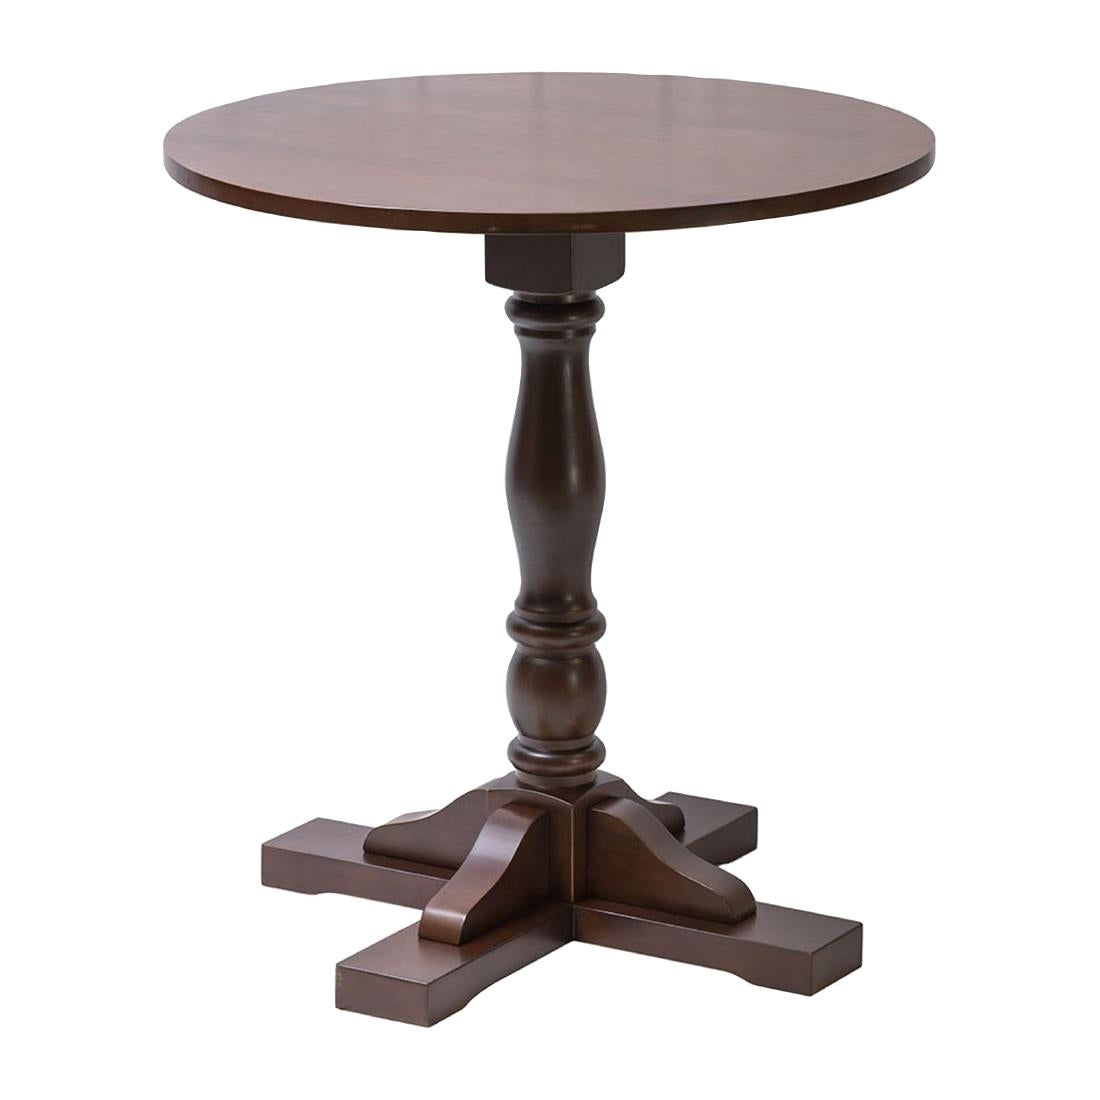 FT495 Oxford Dark Wood Pedestal Round Table 700mm JD Catering Equipment Solutions Ltd